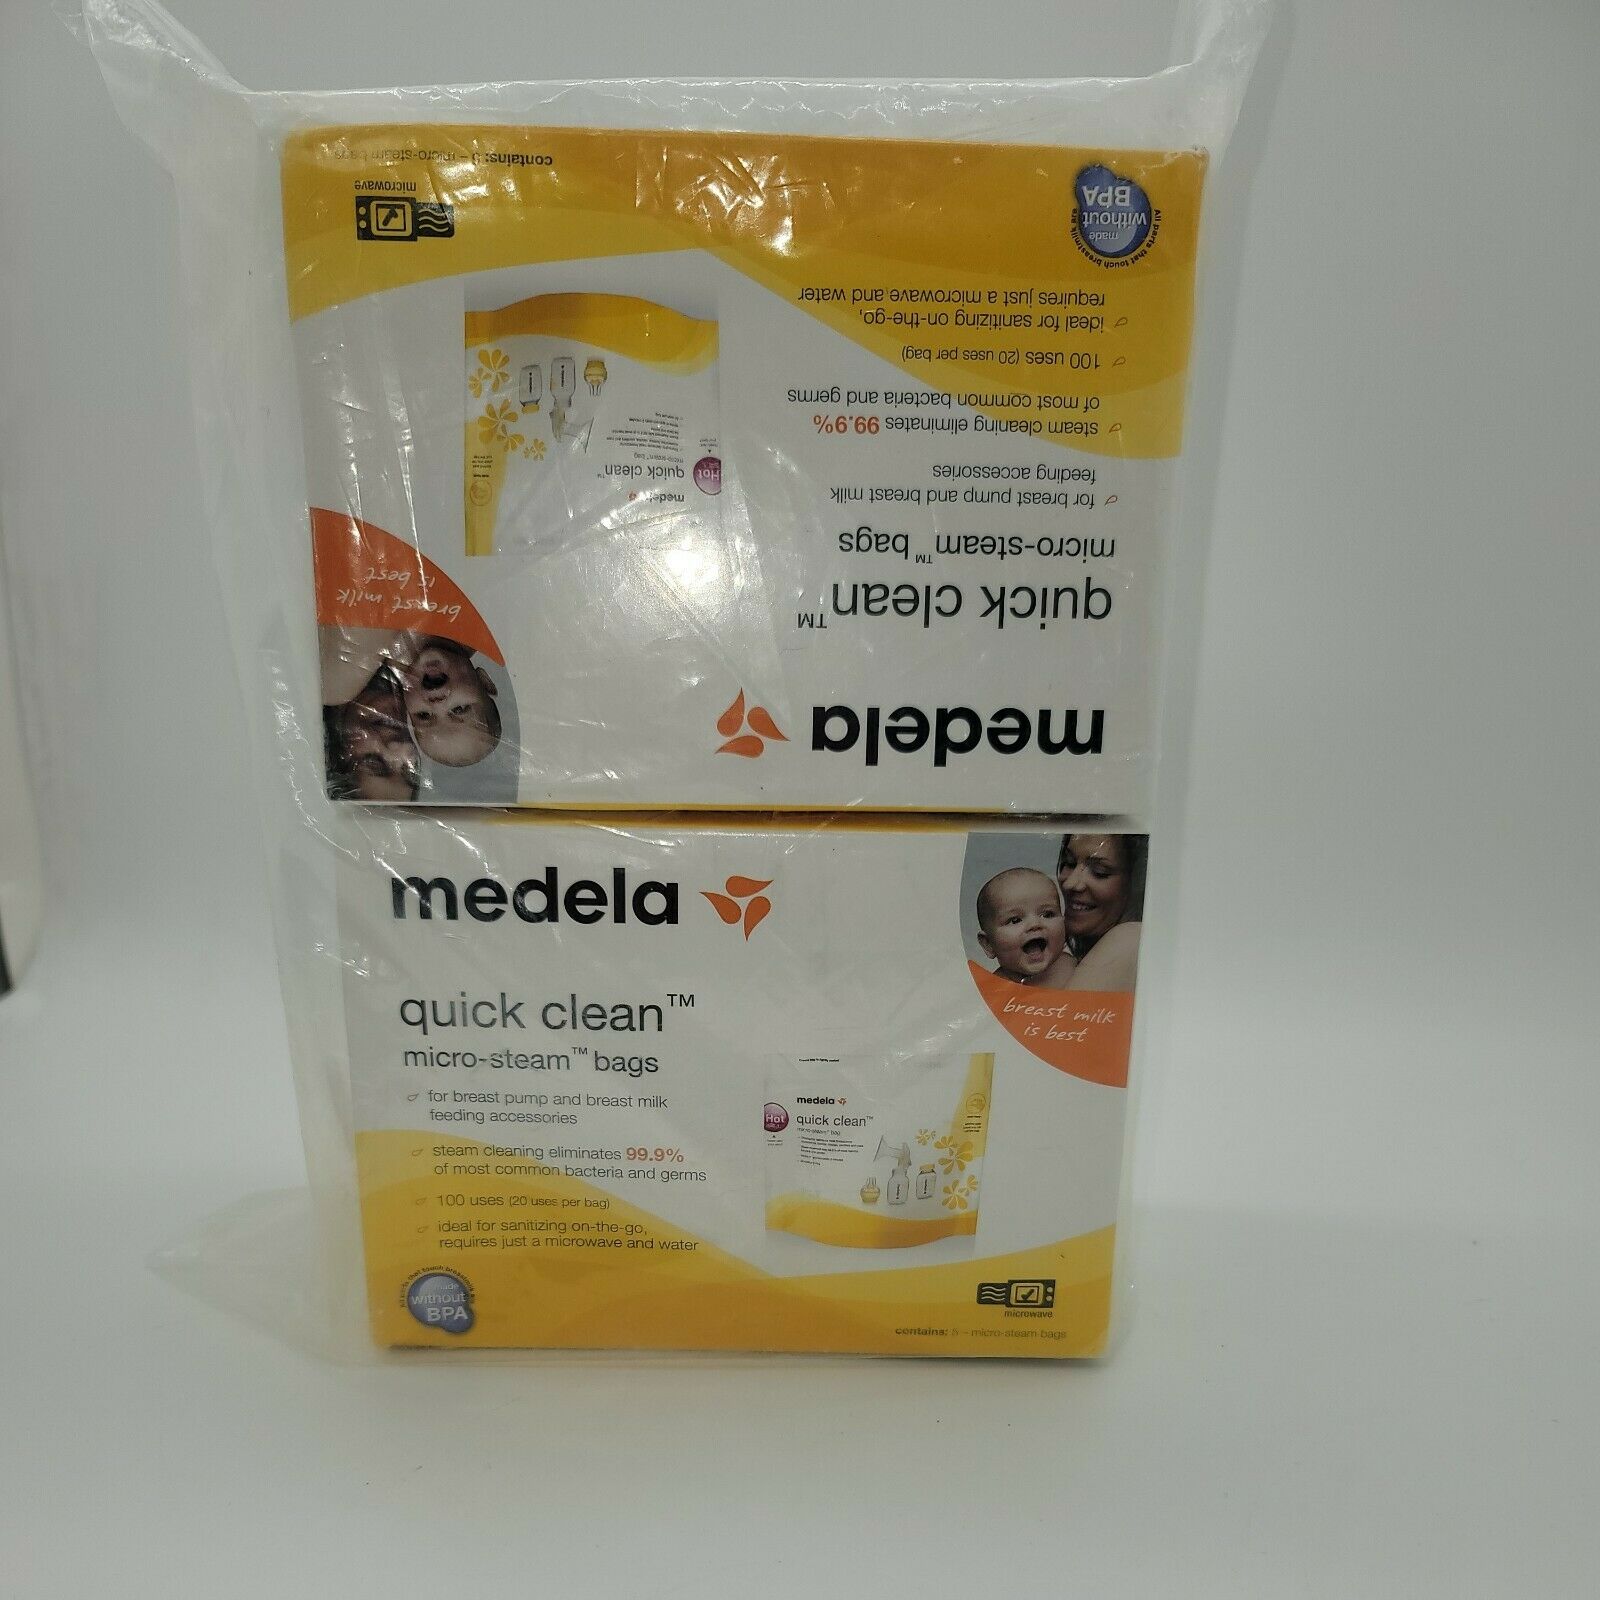 Medela Bags for Steam Breast Milk Quick Clean Micro-steam Bags 5 Count each- 20